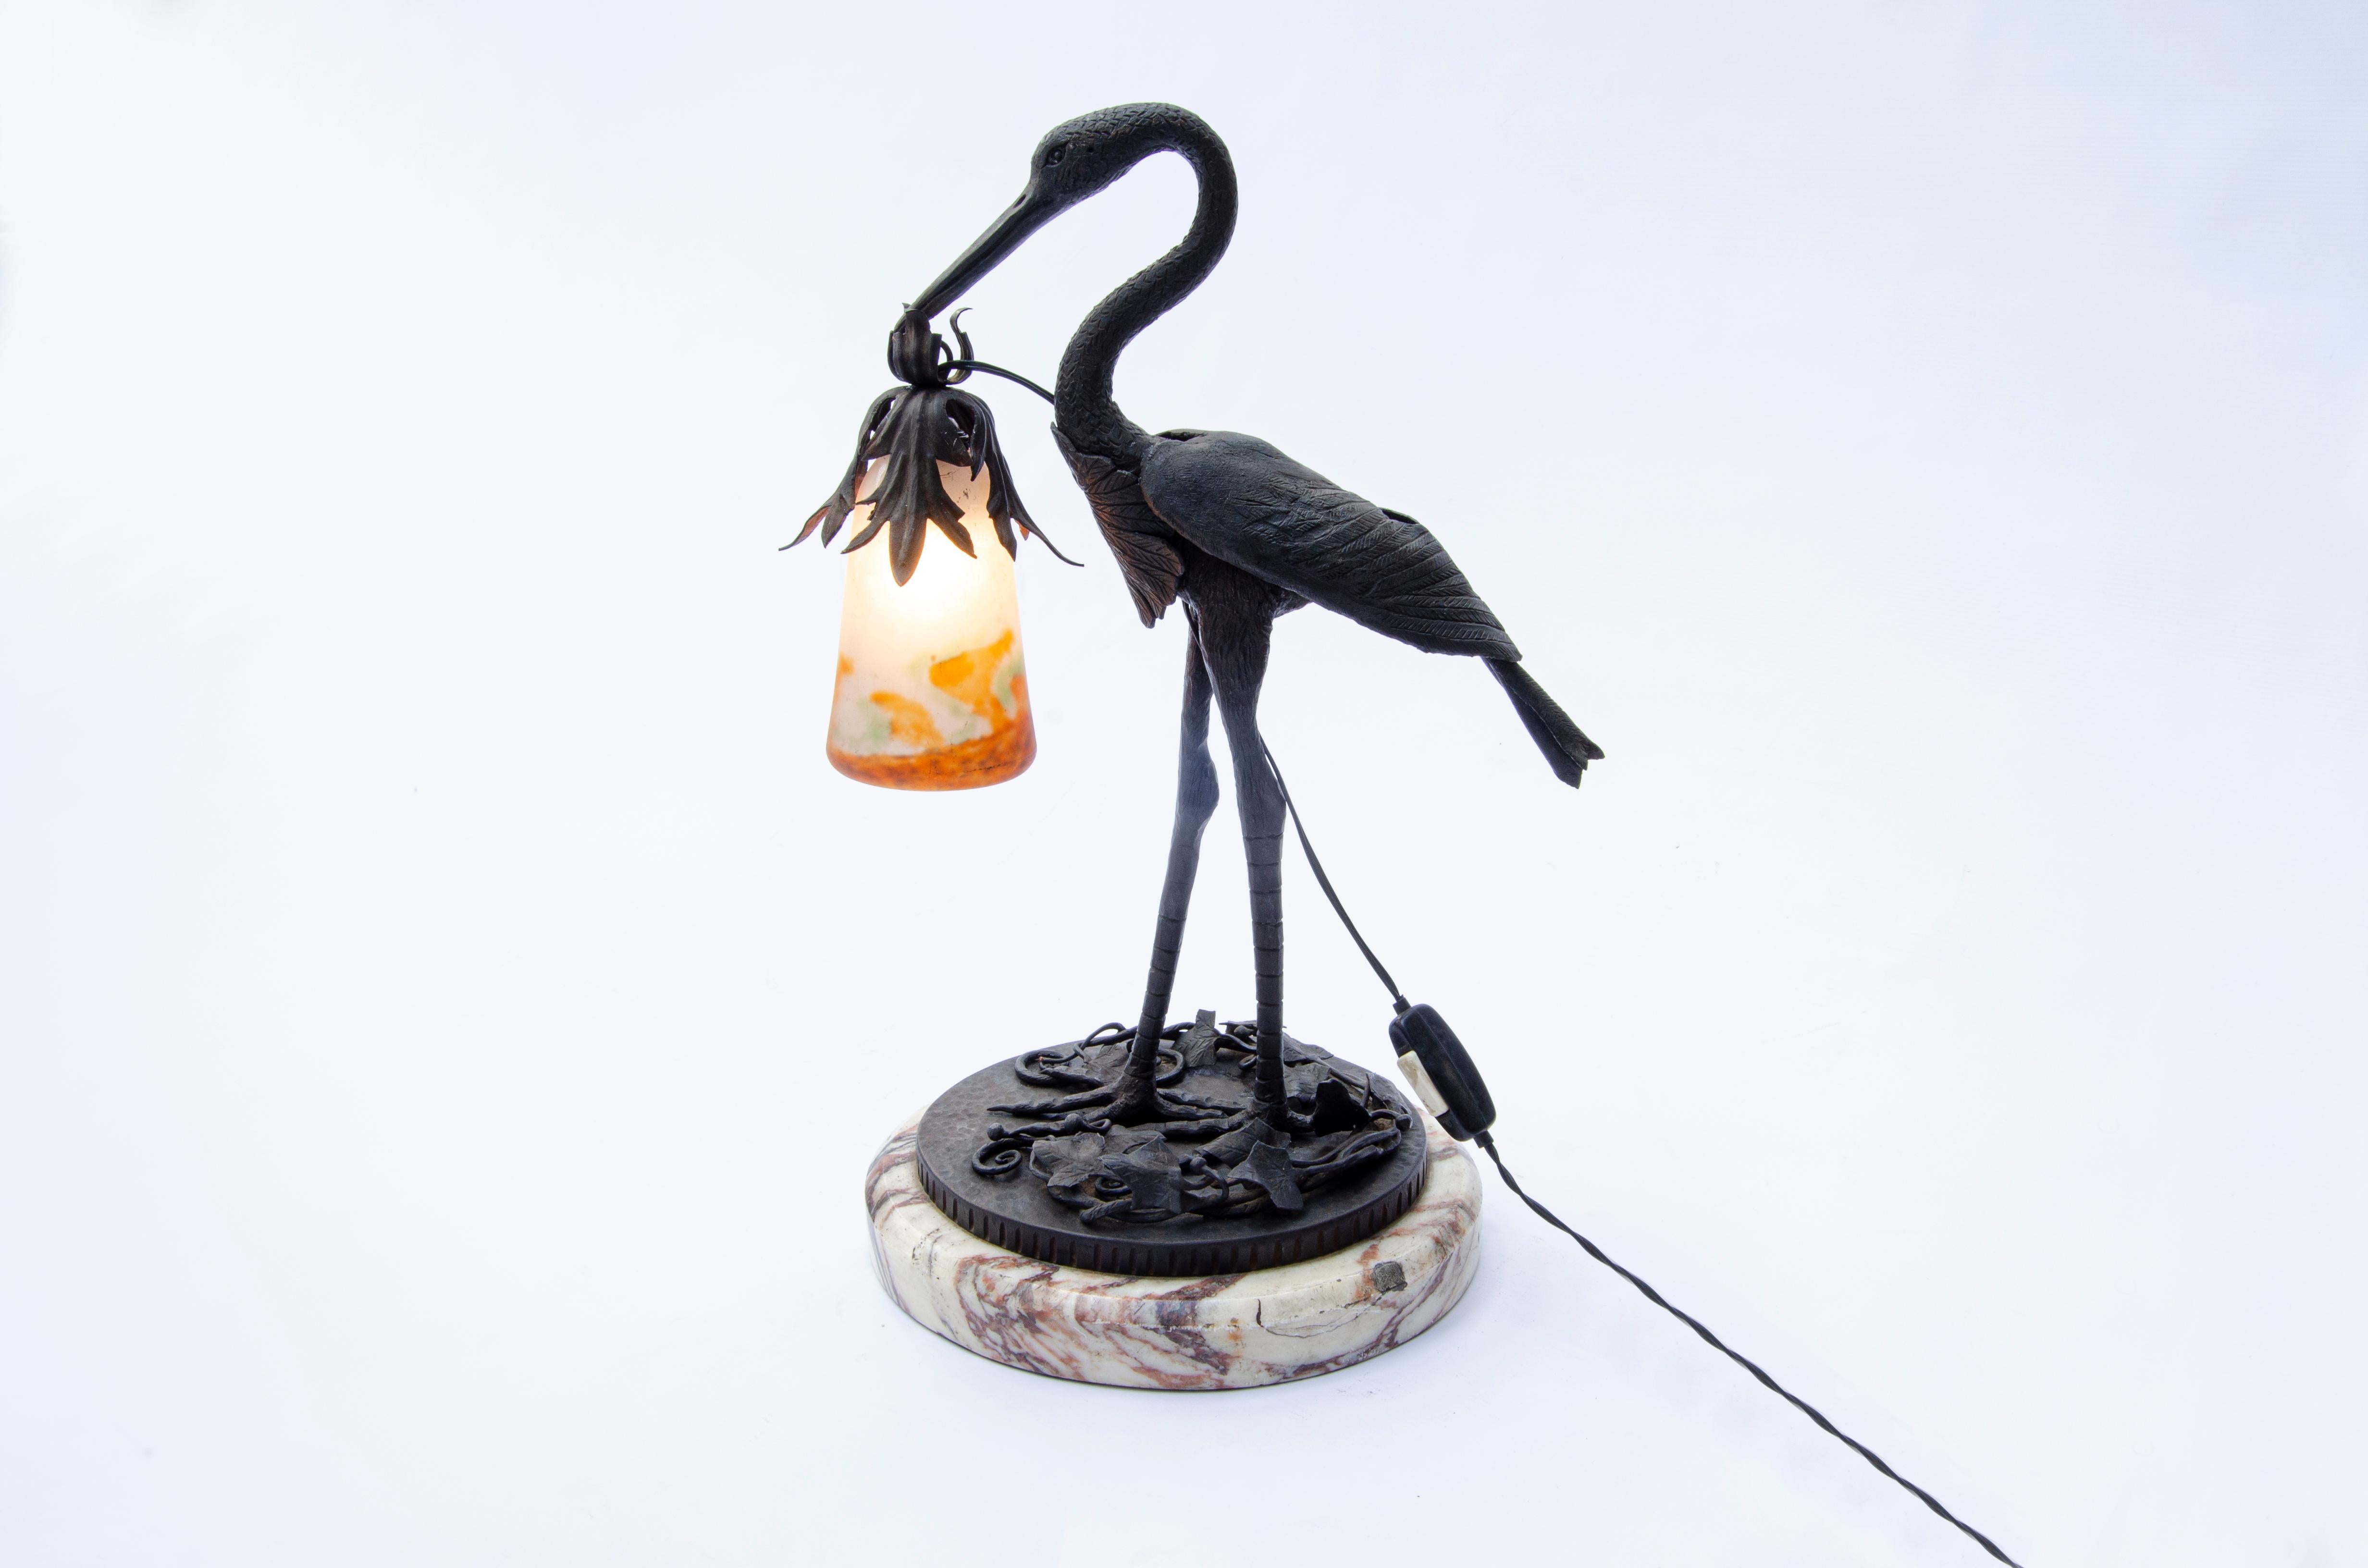 Table lamp with a design of a heron made of iron with a marble base, holding a glass lampshade with its beak. Made by Muller Freres Glass (1858-1959). Signature Muller Fres Luneville.

France, CIRCA 1920.